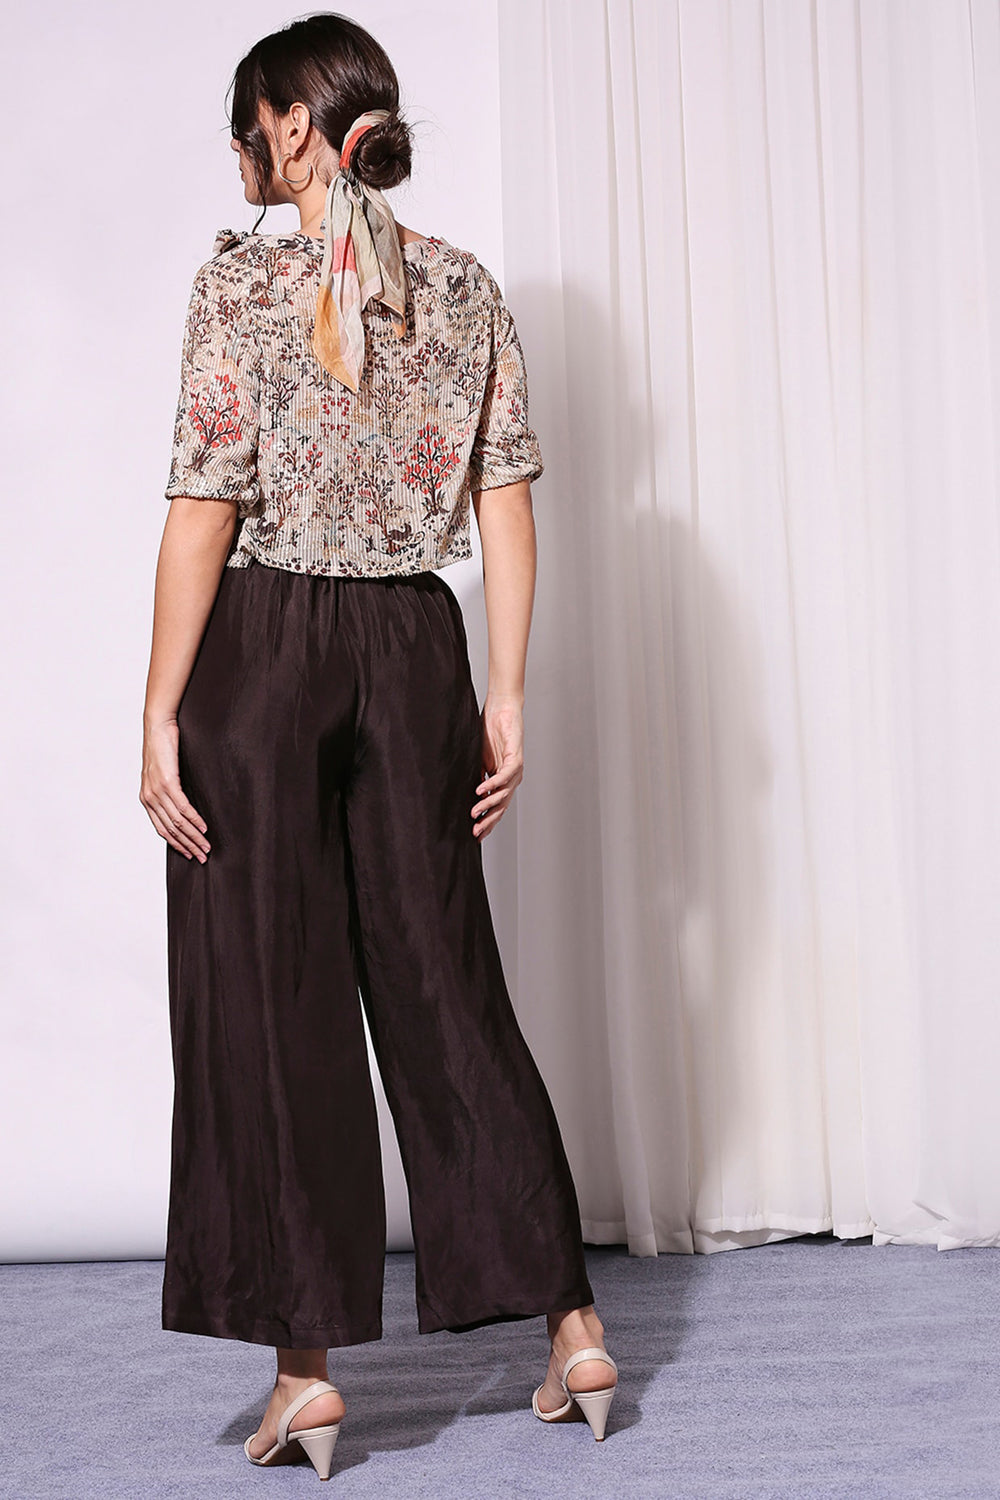 Printed Sequin Off-Shoulder Top Paired With Brown Pants